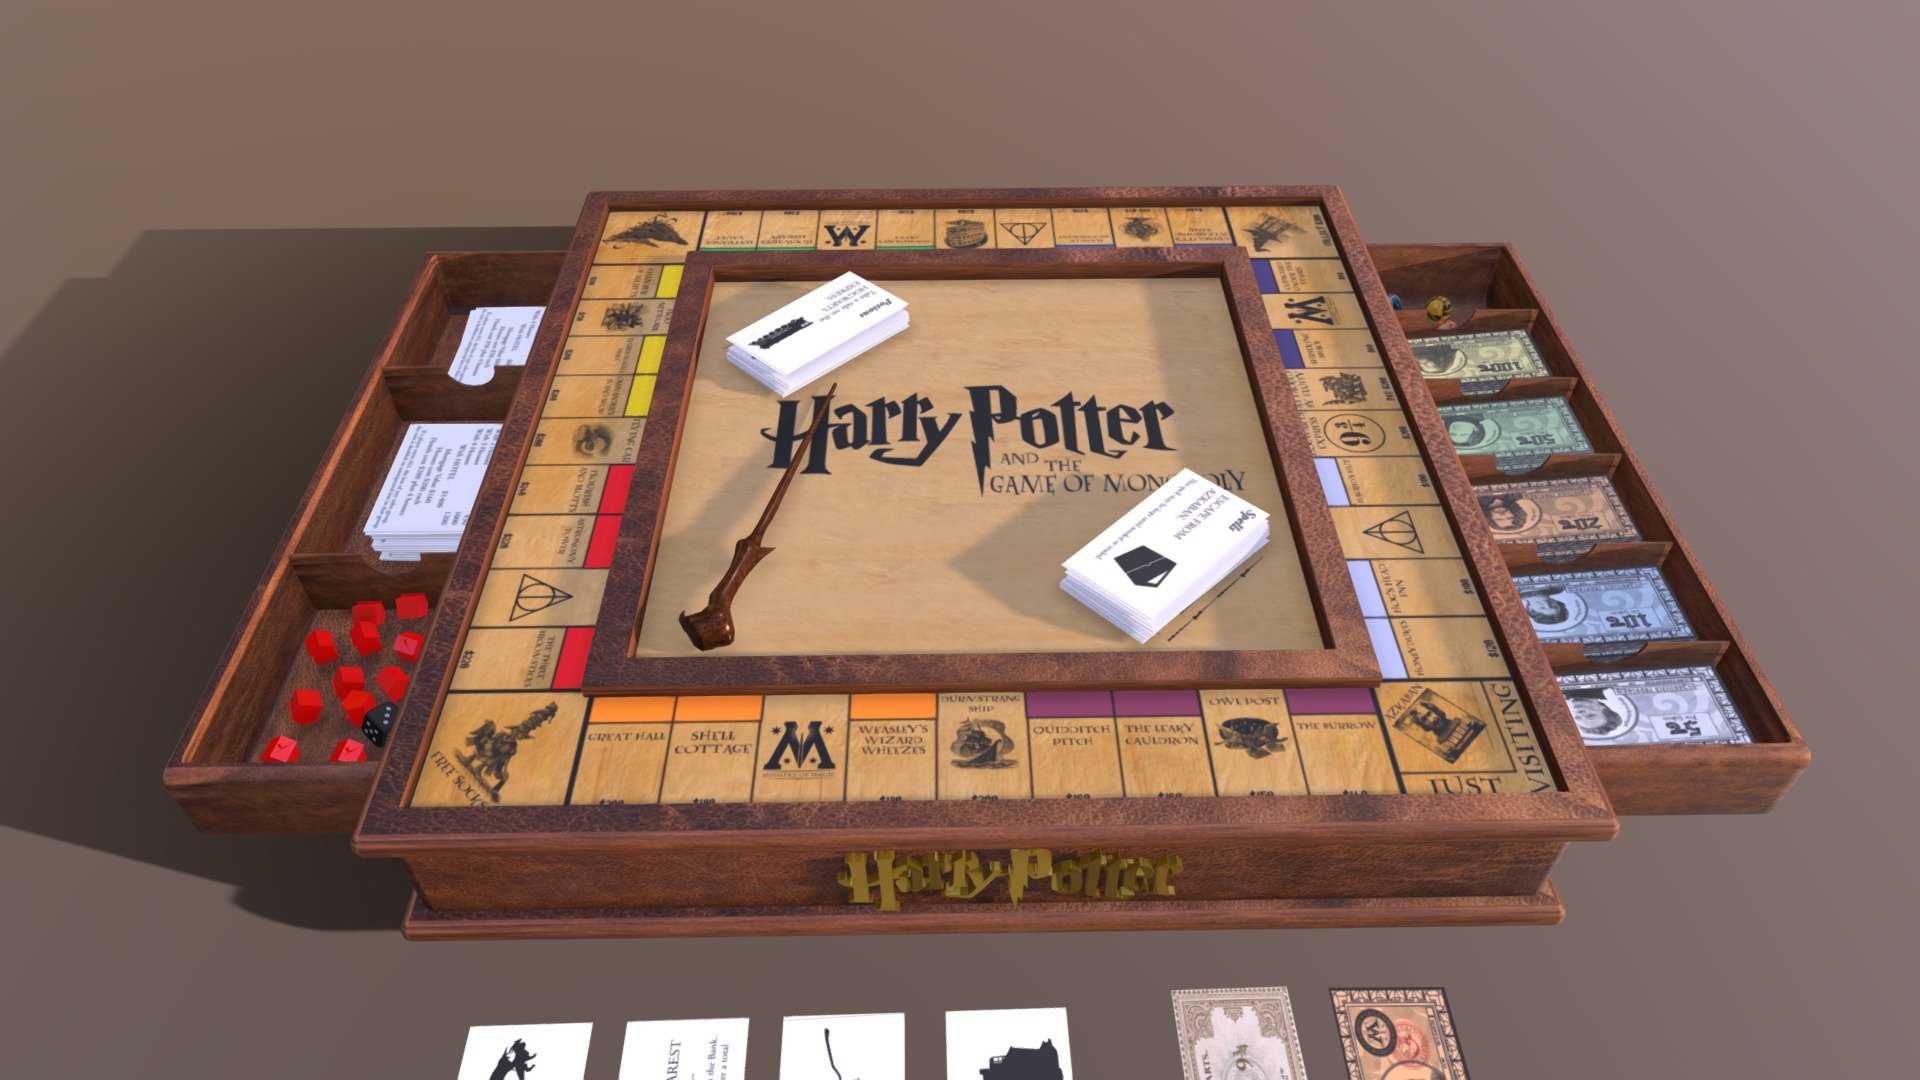 Harry Potter themed Monopoly project